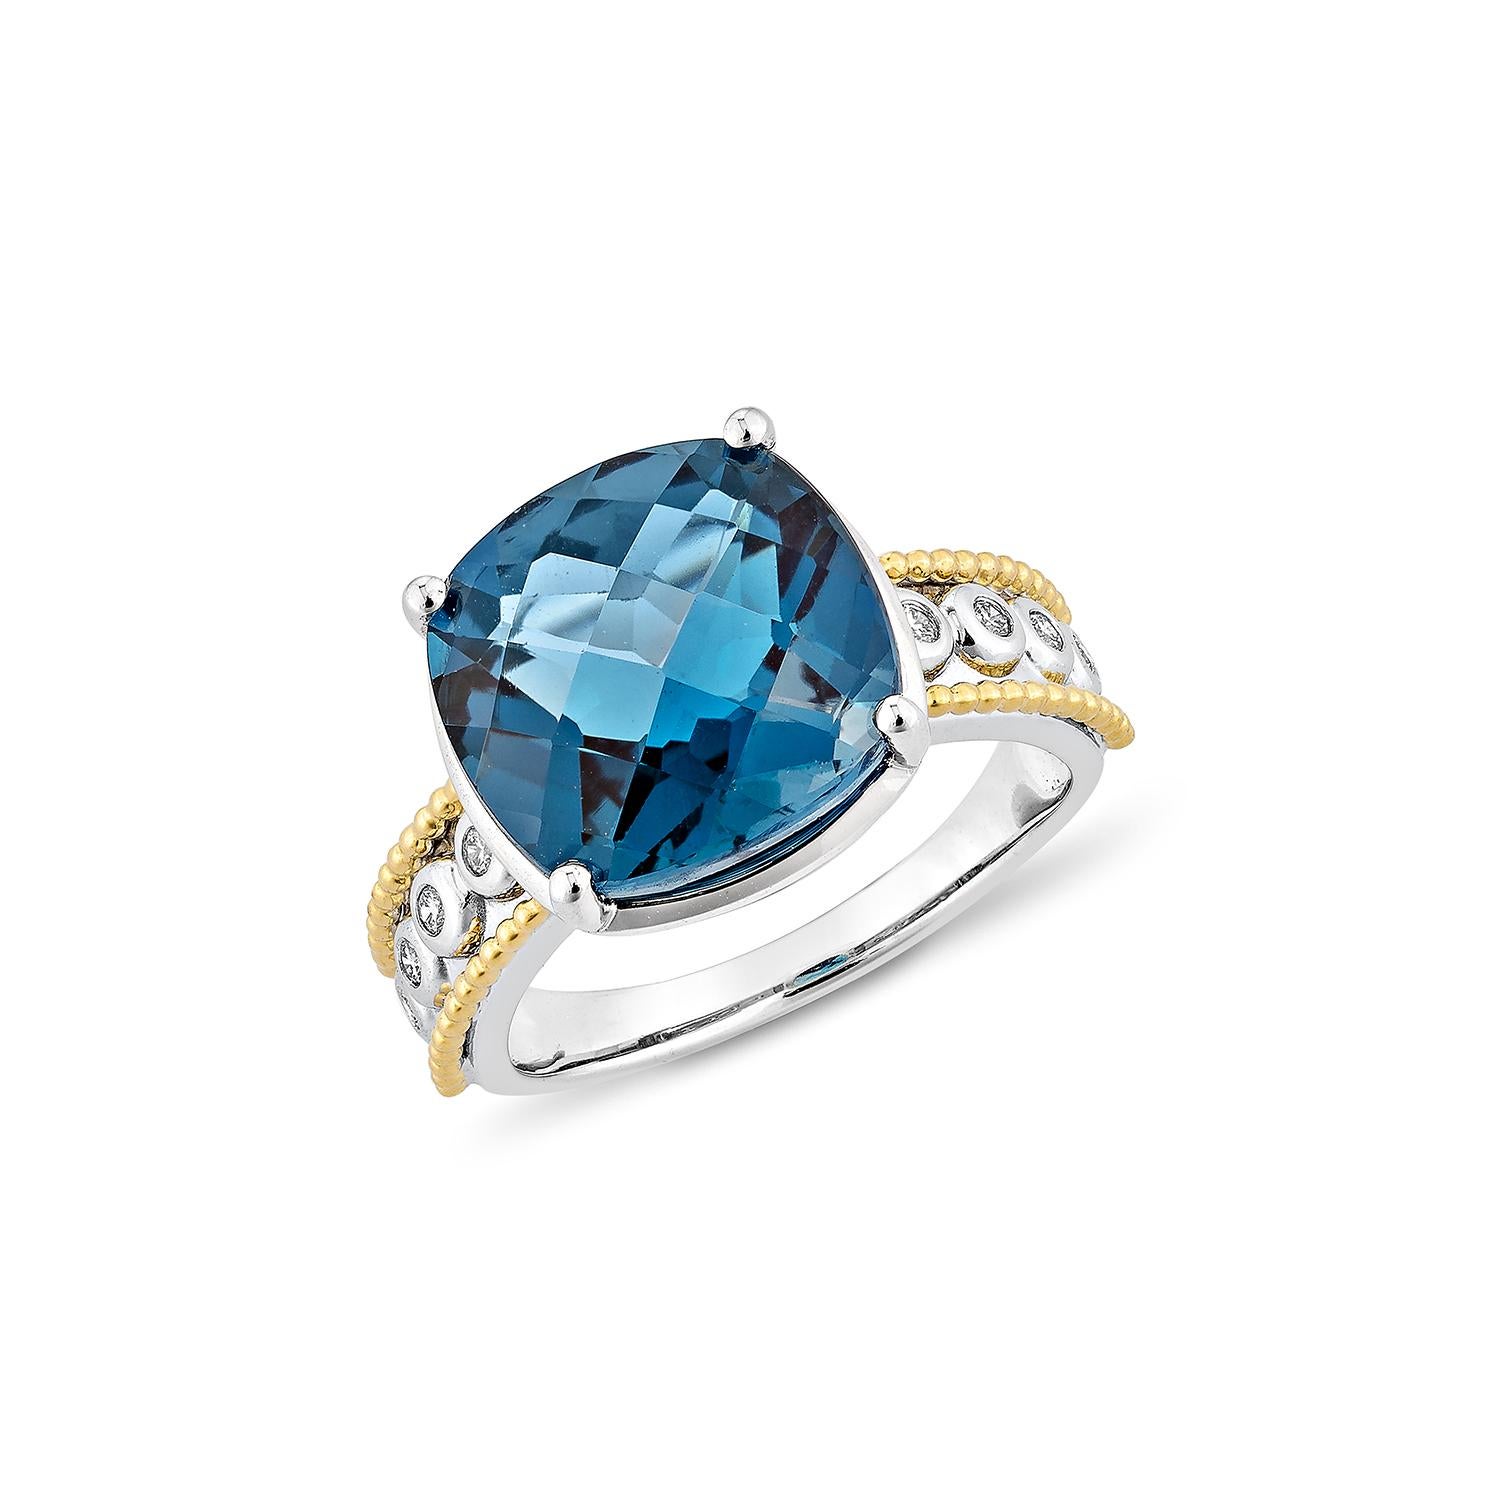 Contemporary 8.12 Carat London Blue Topaz Fancy Ring in 18KWYG with White Diamond. For Sale